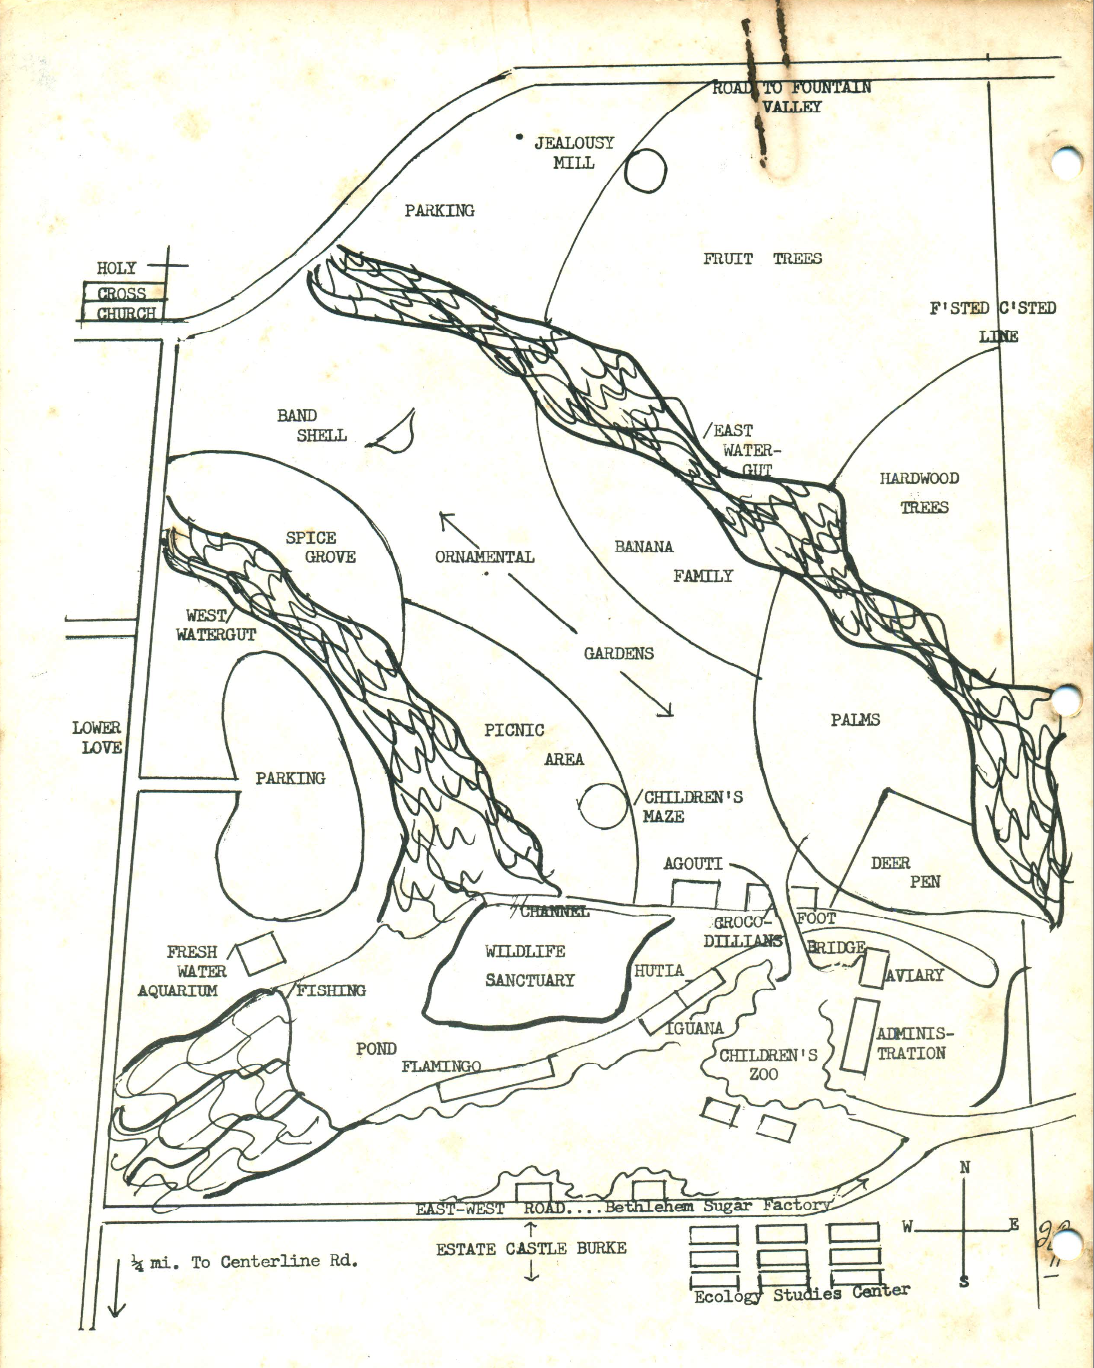 This drawing shows an outline of the proposed Estate Castle Burke Zoo Park. Created in late 1960s or early 1970s, the image's origin is unknown.